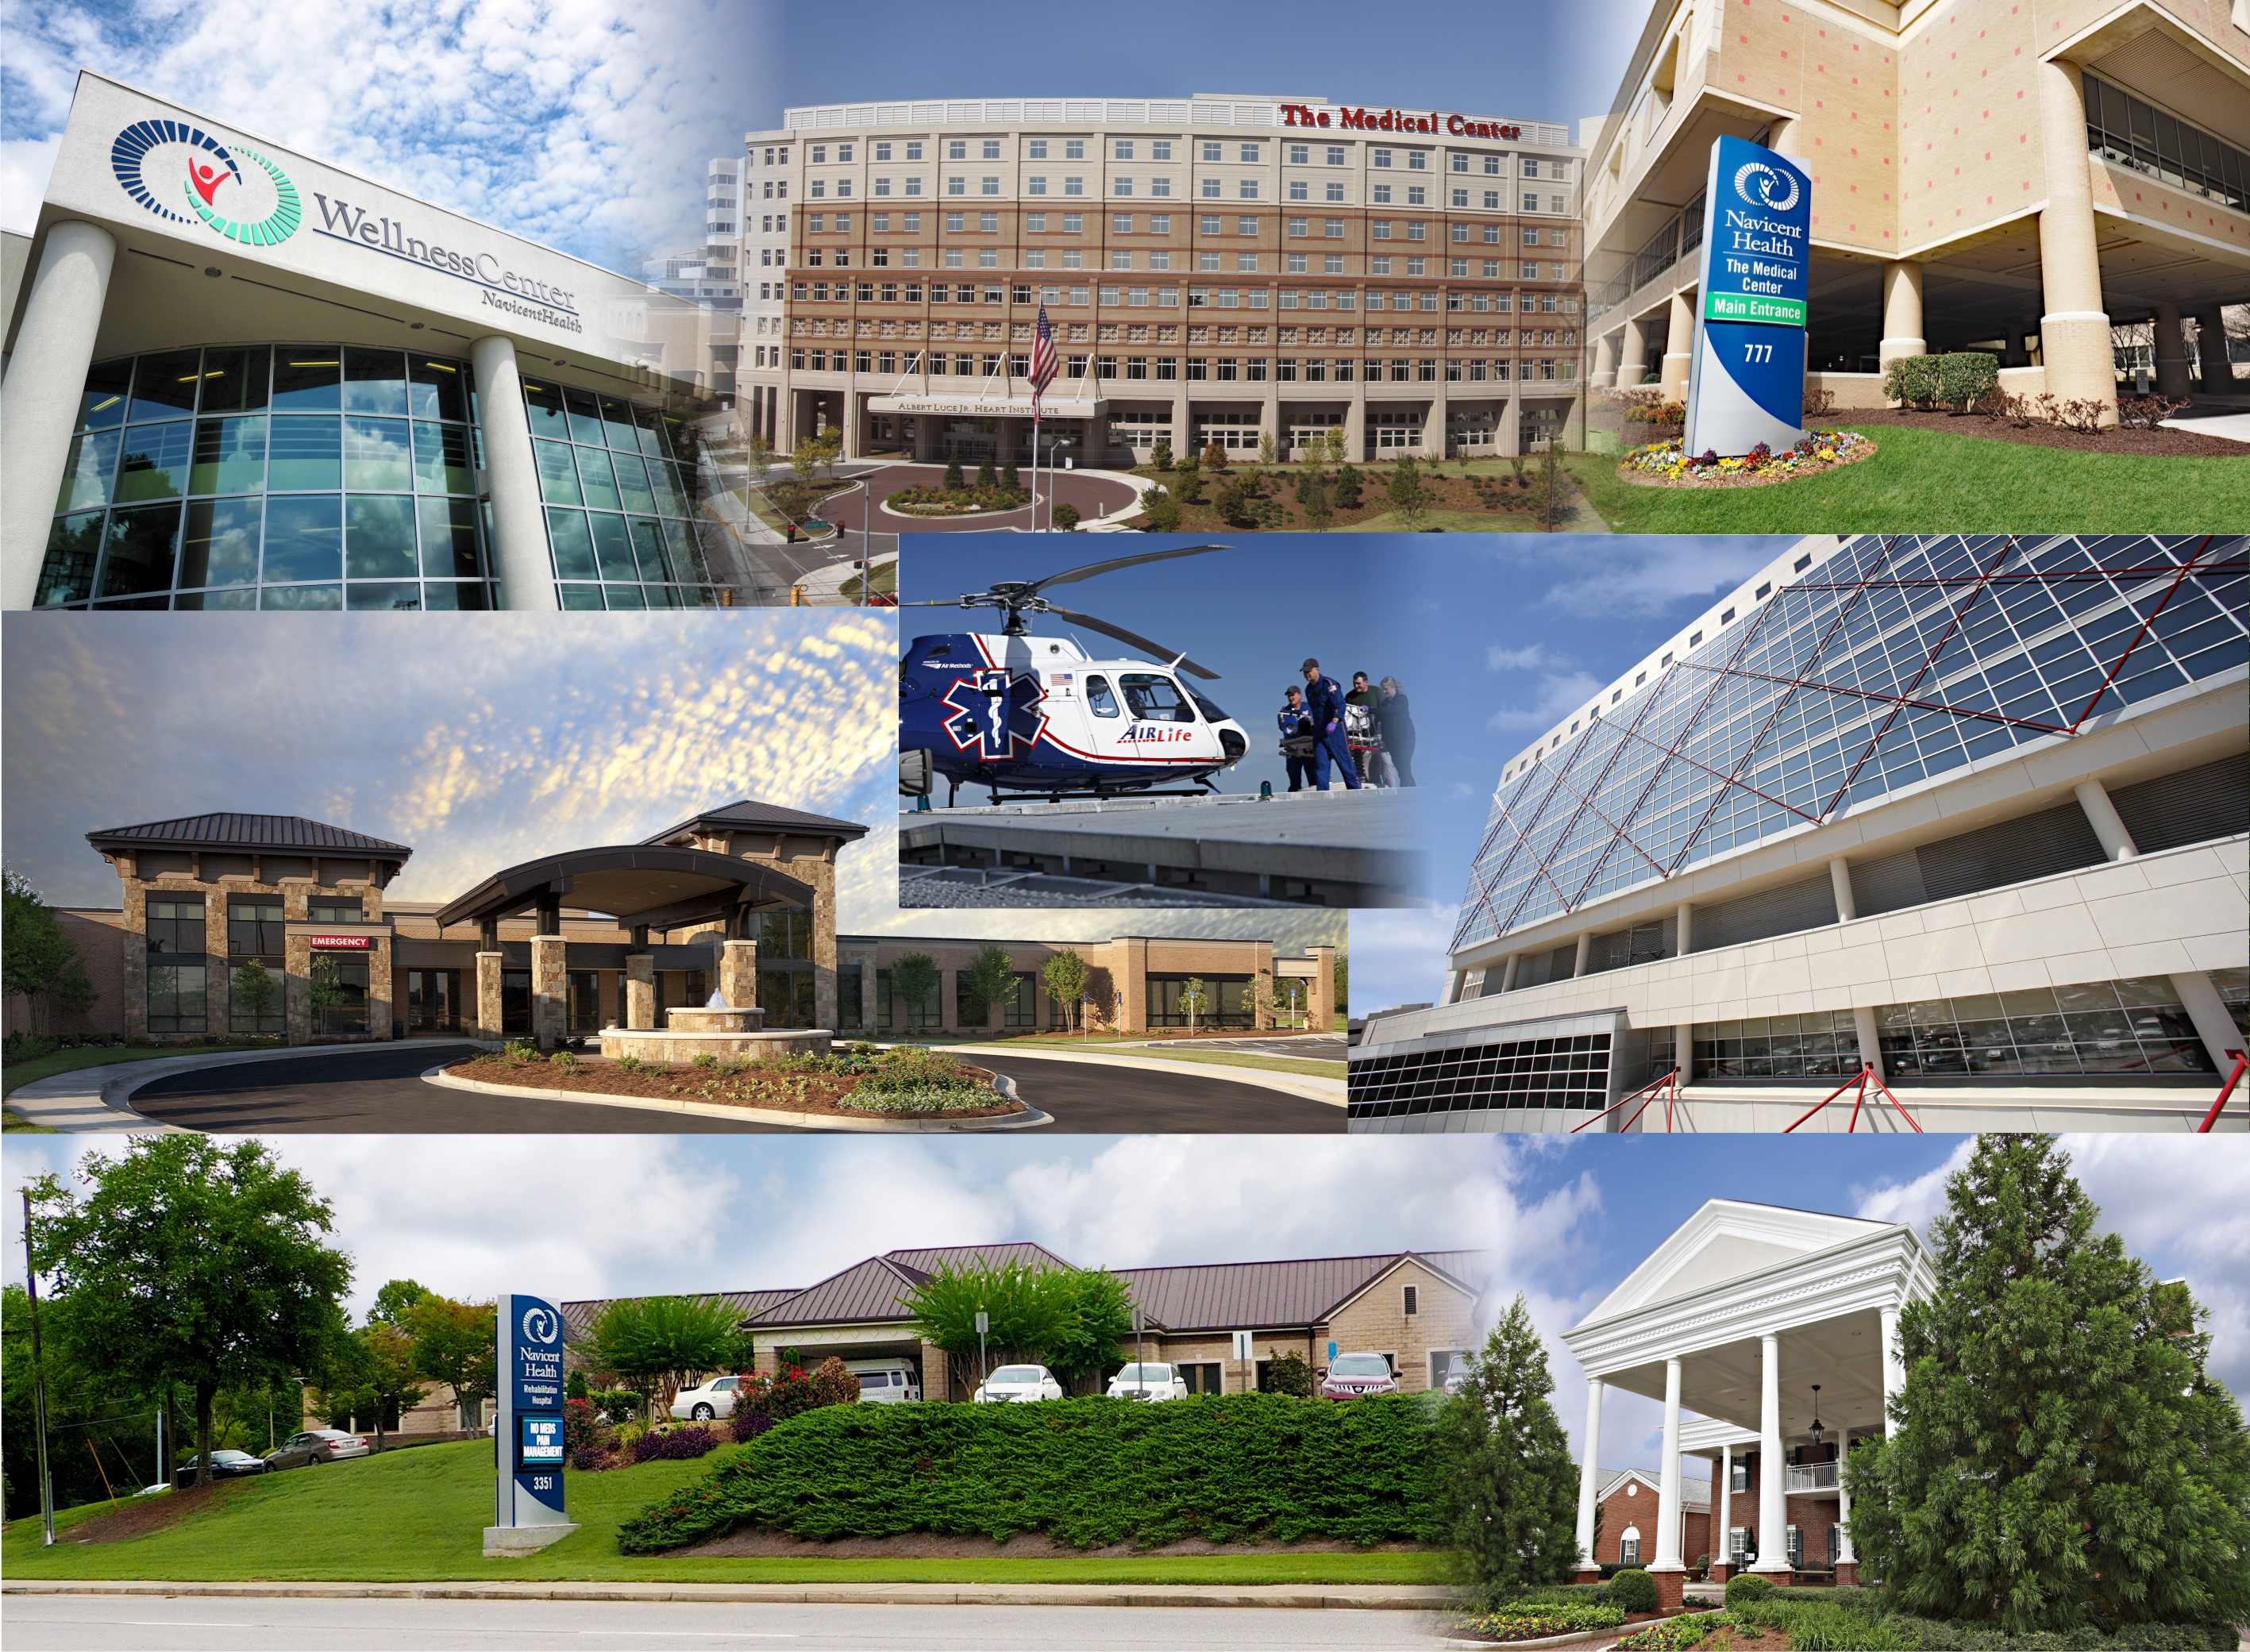 Collage of photos of Atrium Health Navicent buildings and locations